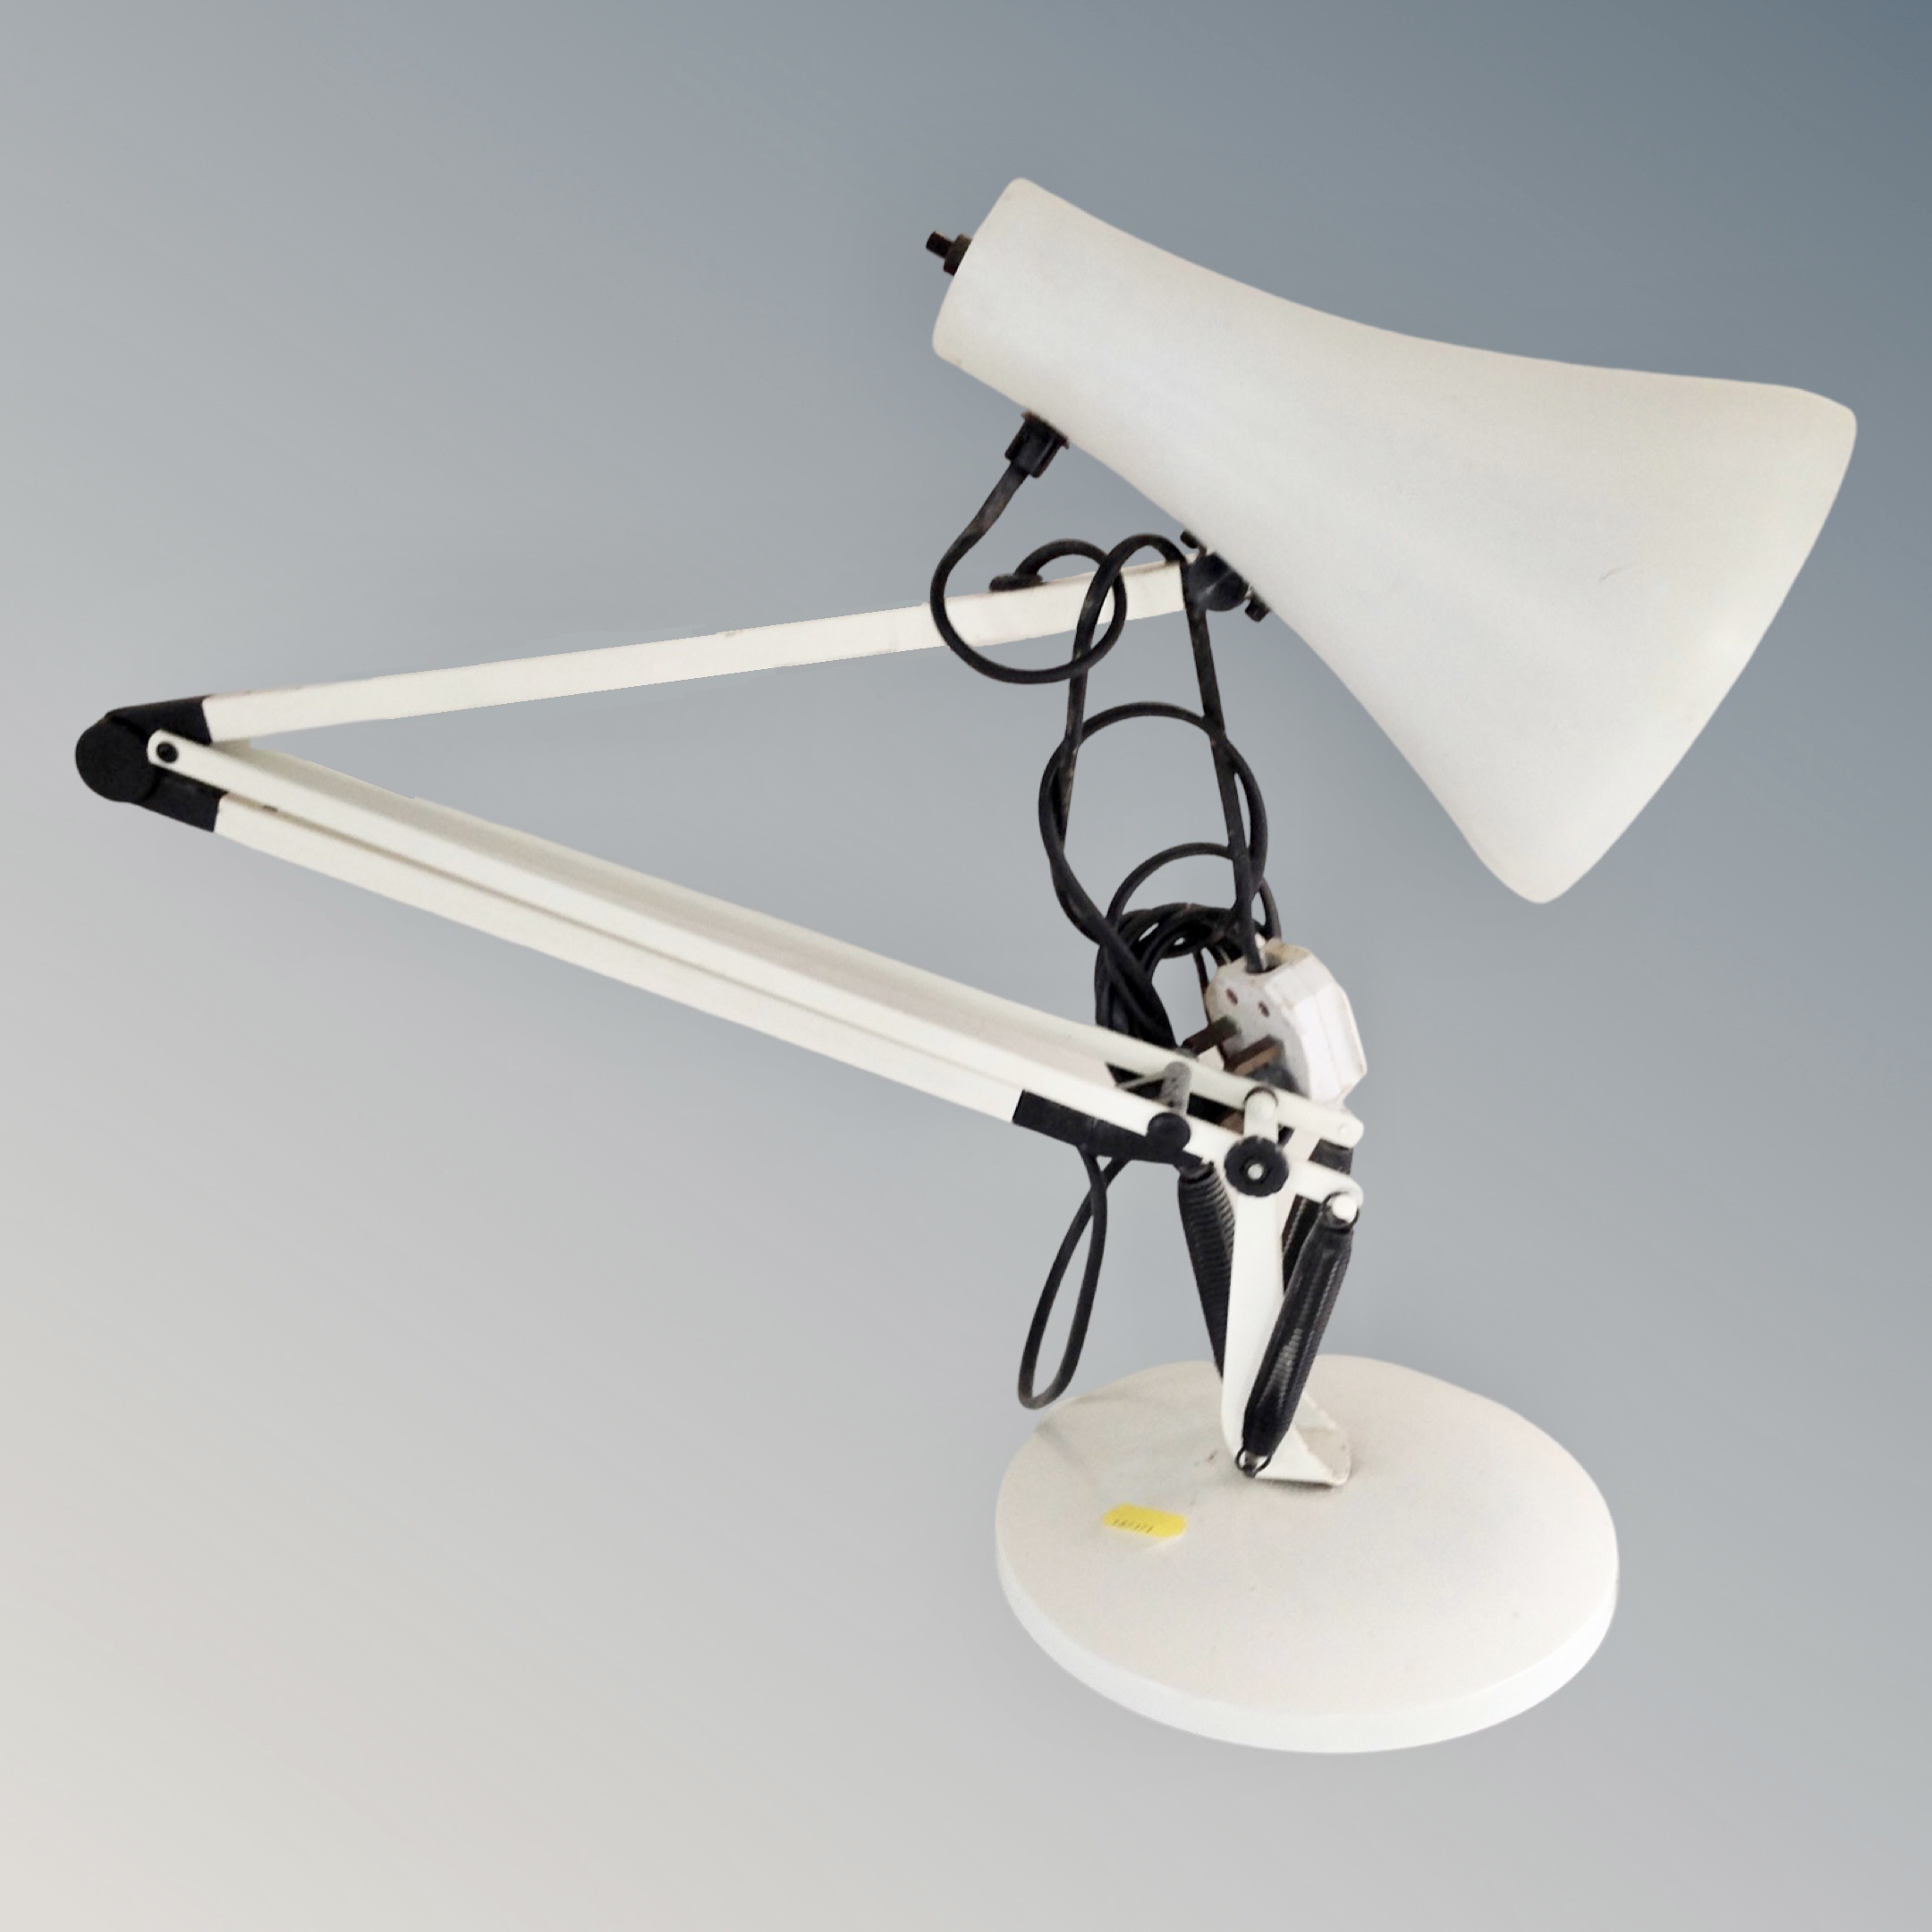 A metal angle poise table lamp